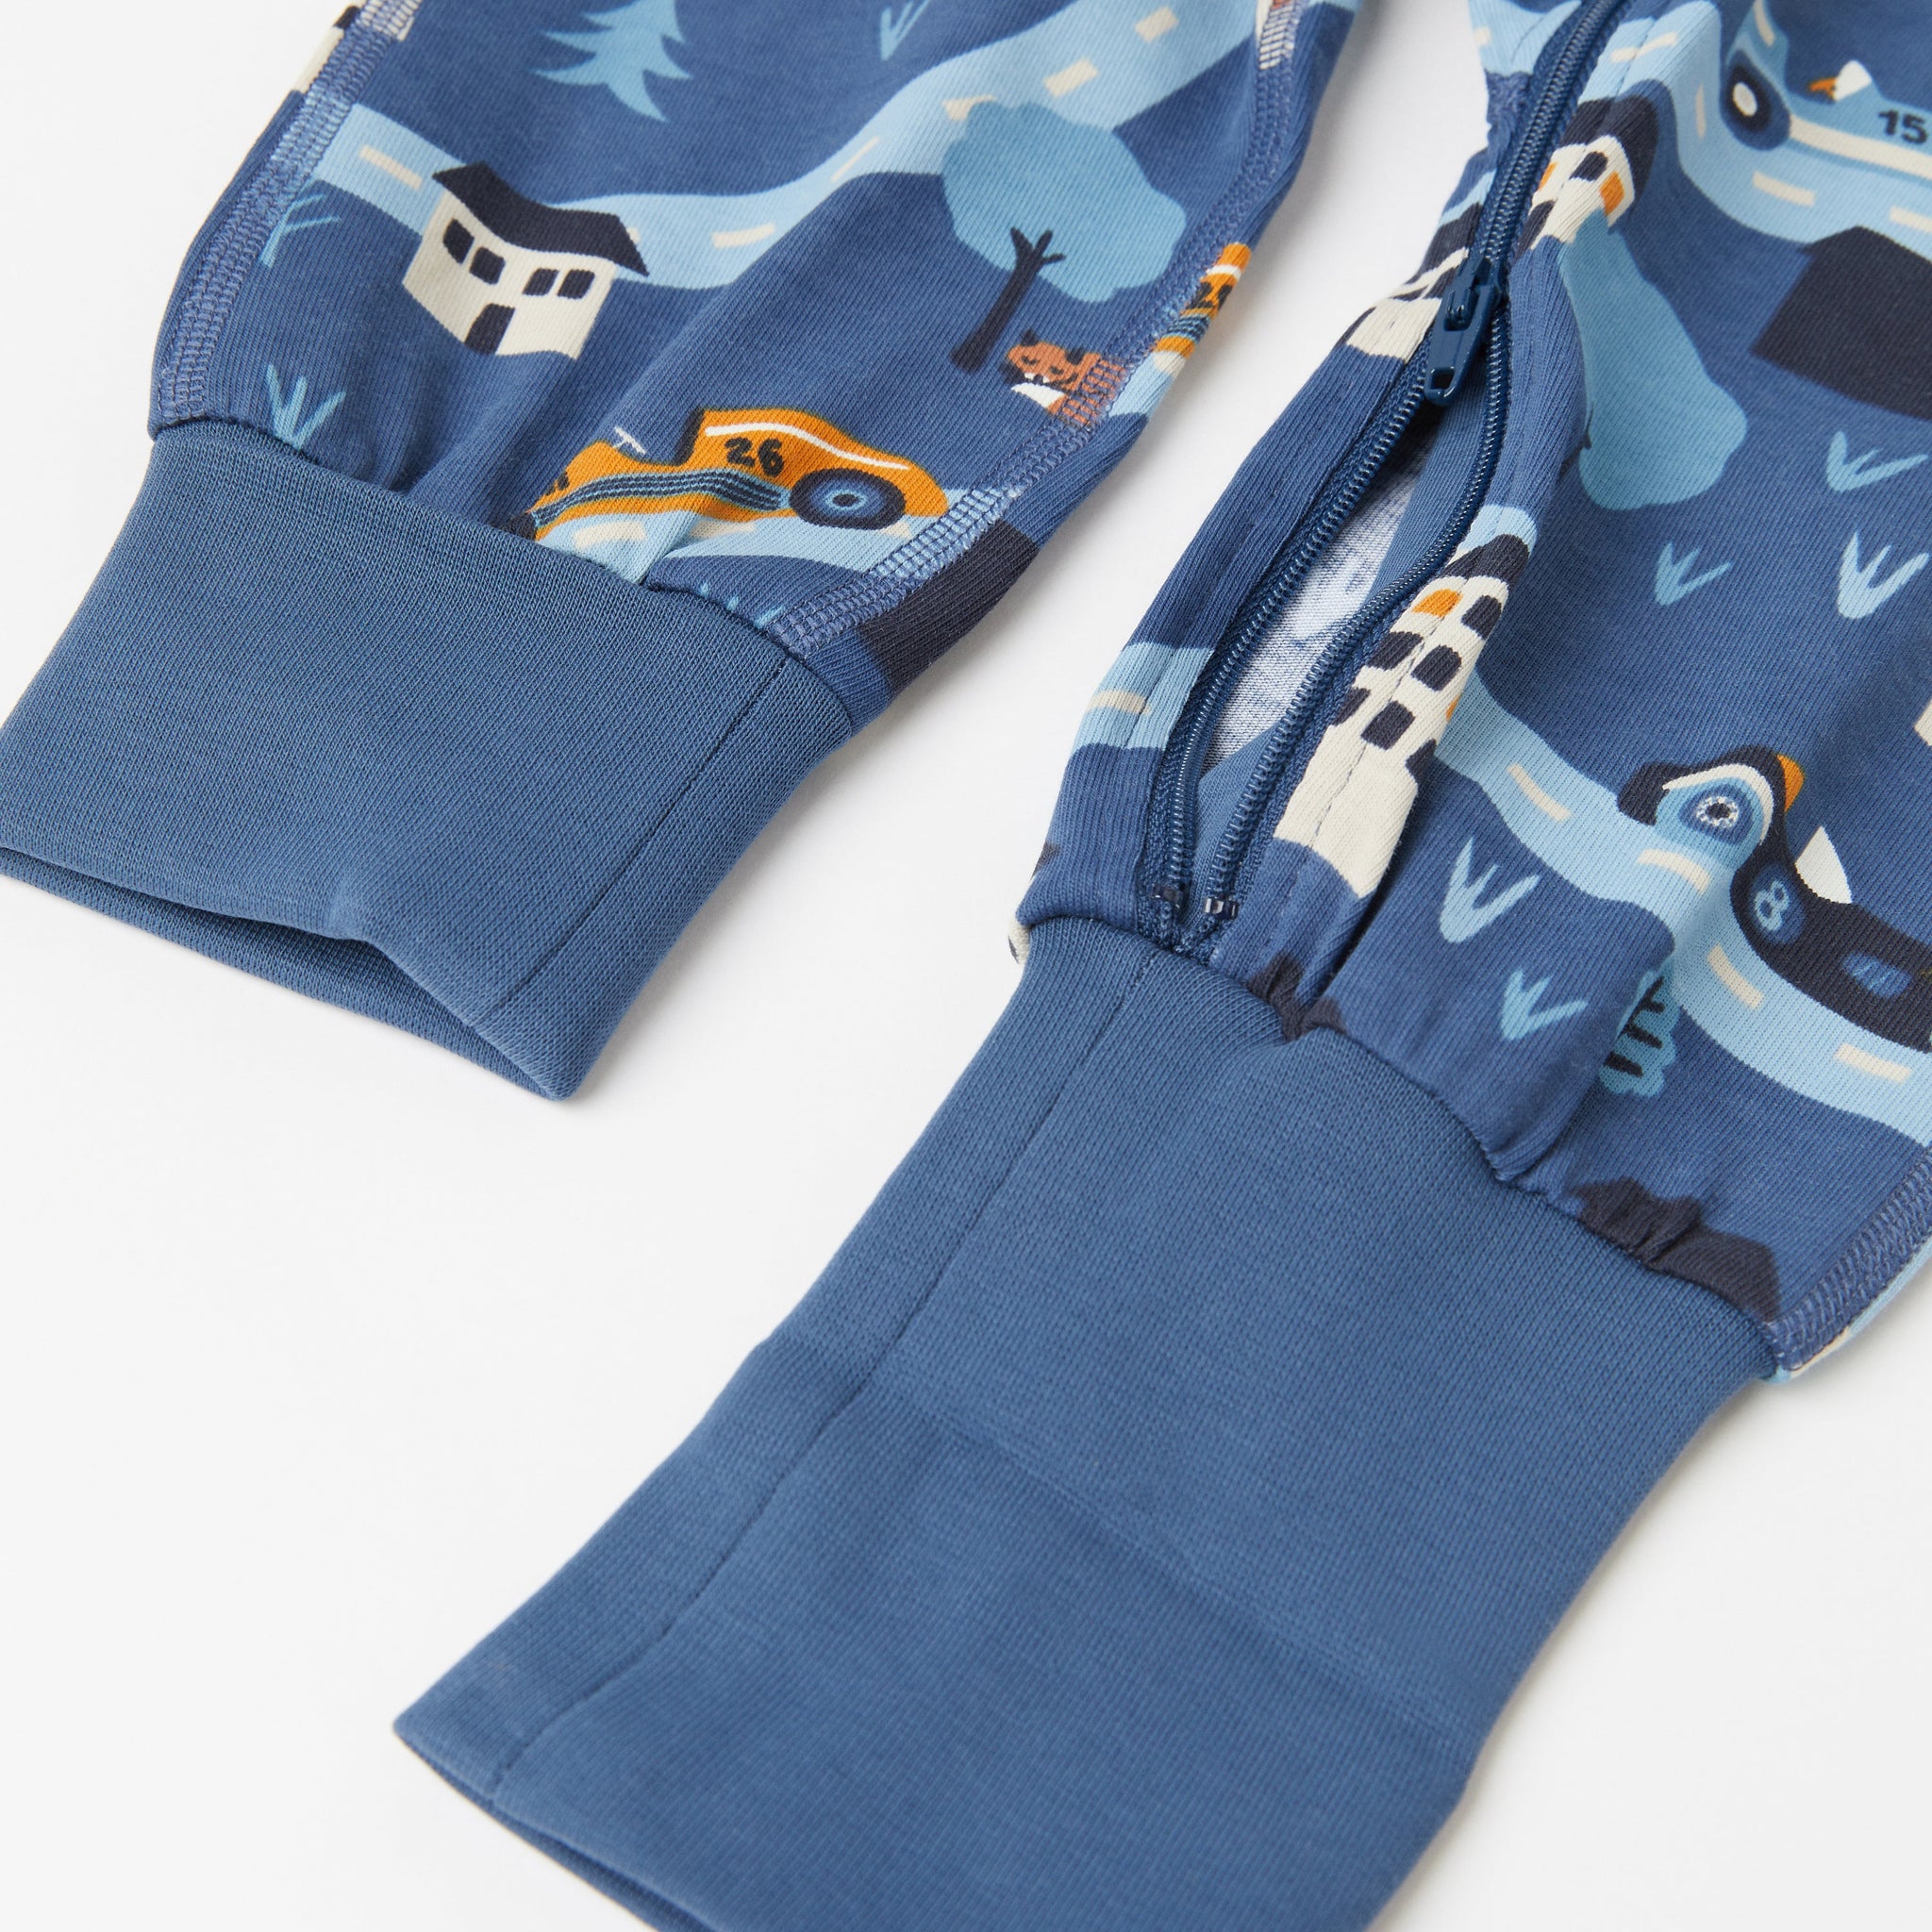 Car Print Blue Baby All-In-One from the Polarn O. Pyret Kidswear collection. The best ethical kids clothes